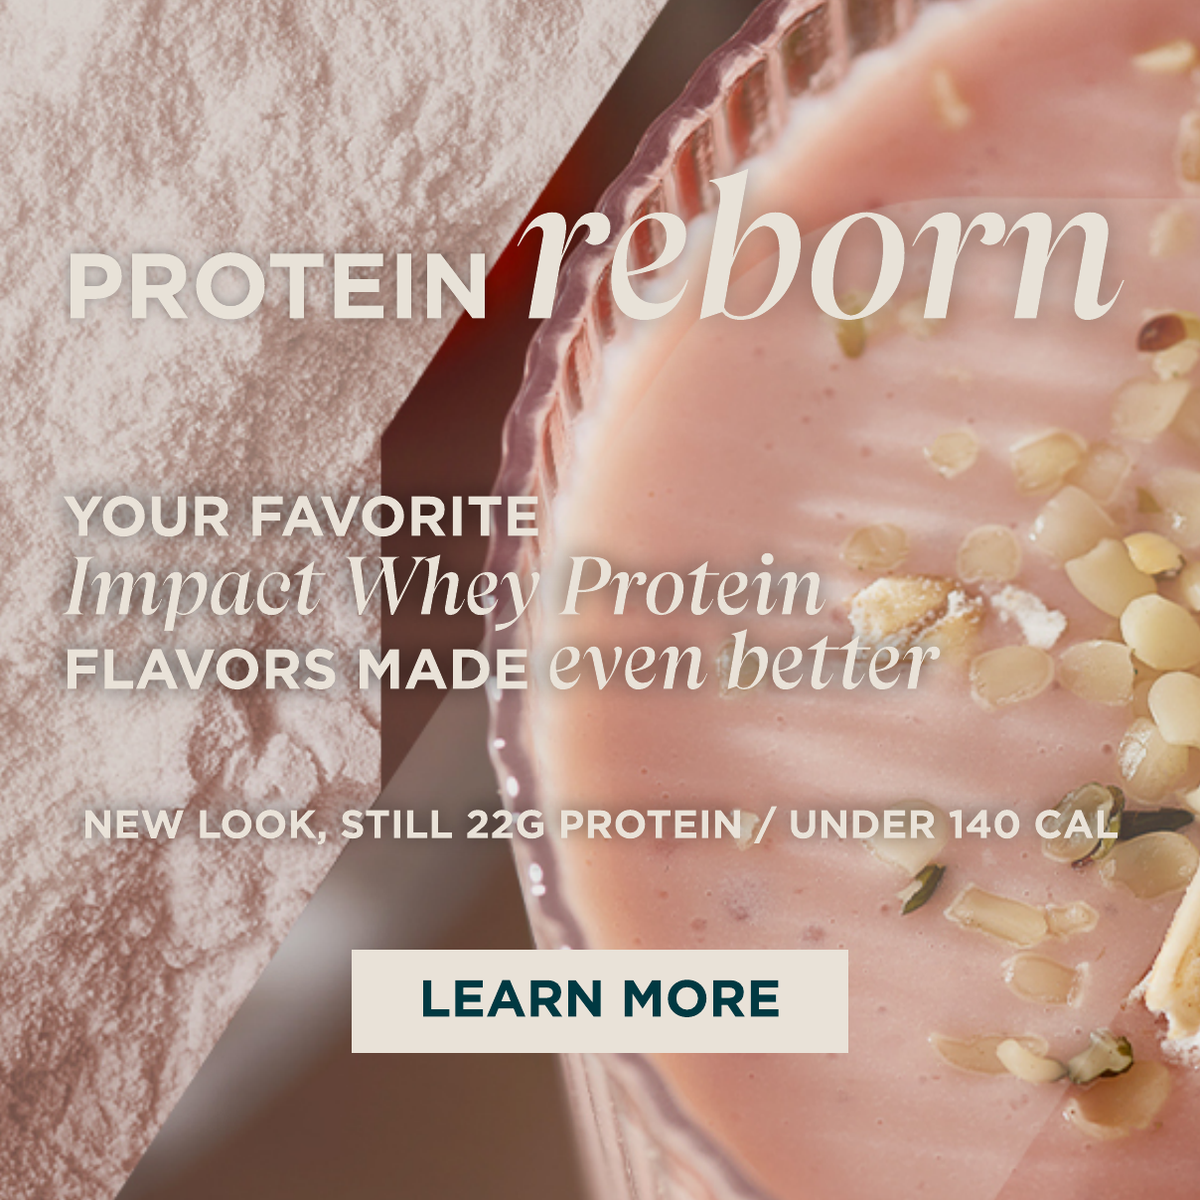 https://ca.myprotein.com/blog/supplements/new-improved-whey-protein-flavors/